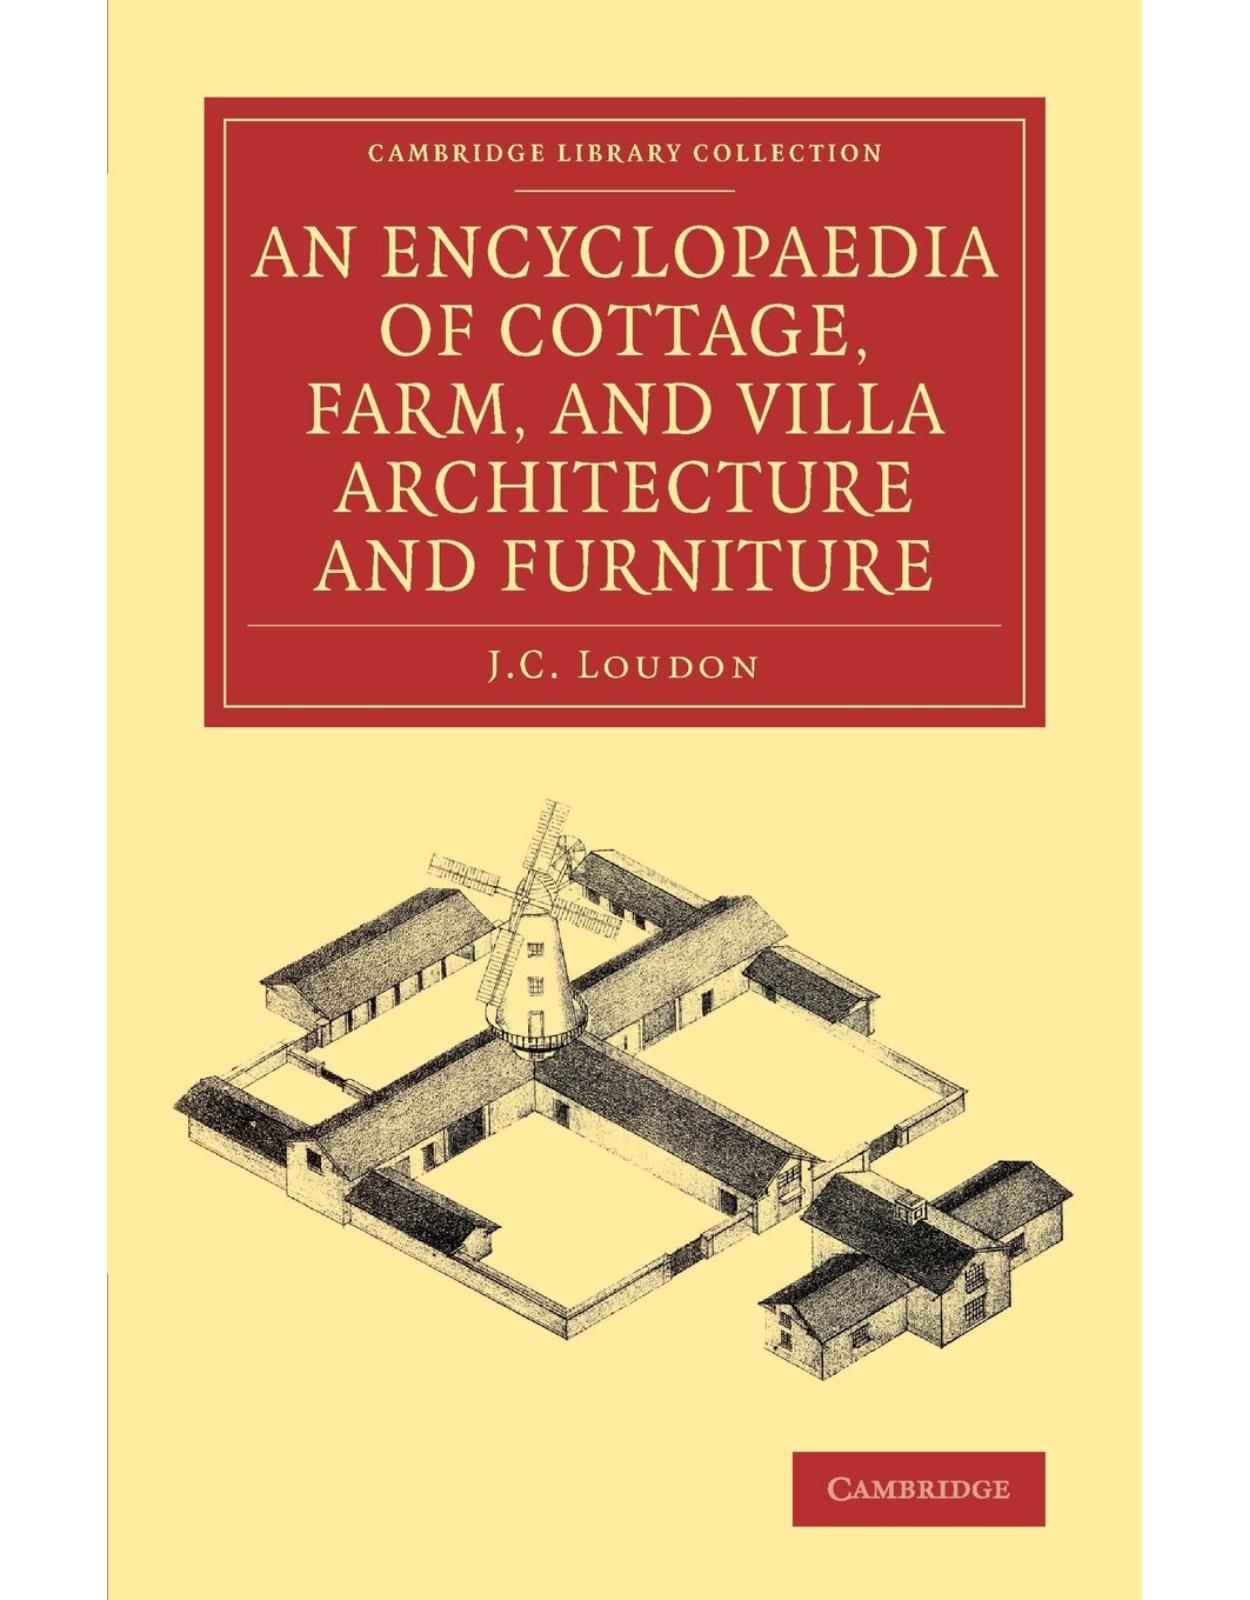 An Encyclopaedia of Cottage, Farm, and Villa Architecture and Furniture (Cambridge Library Collection - Art and Architecture) 